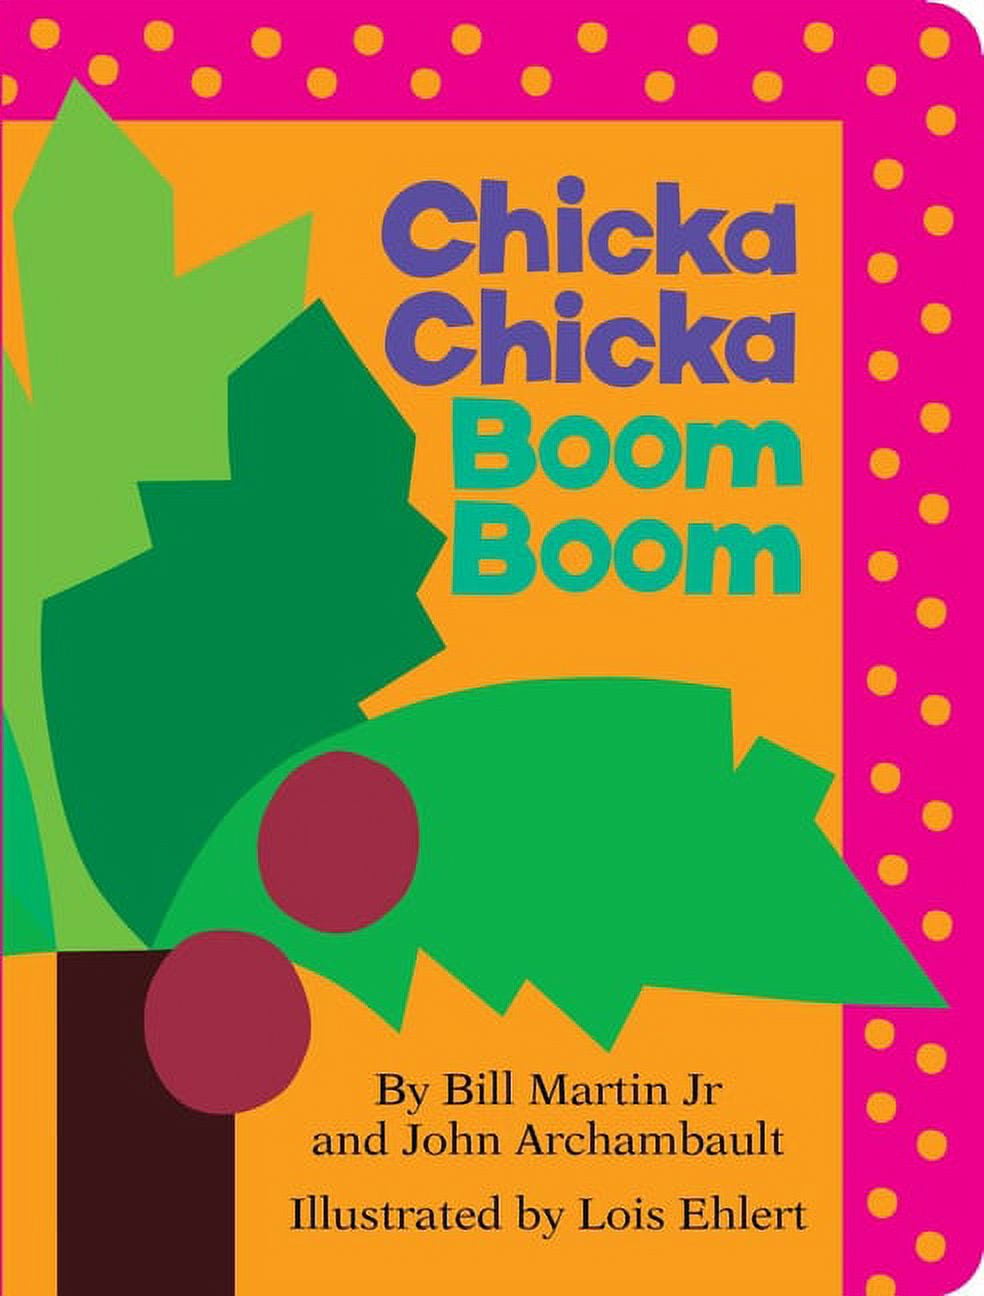 cindy plymer recommends chick a boom room pic